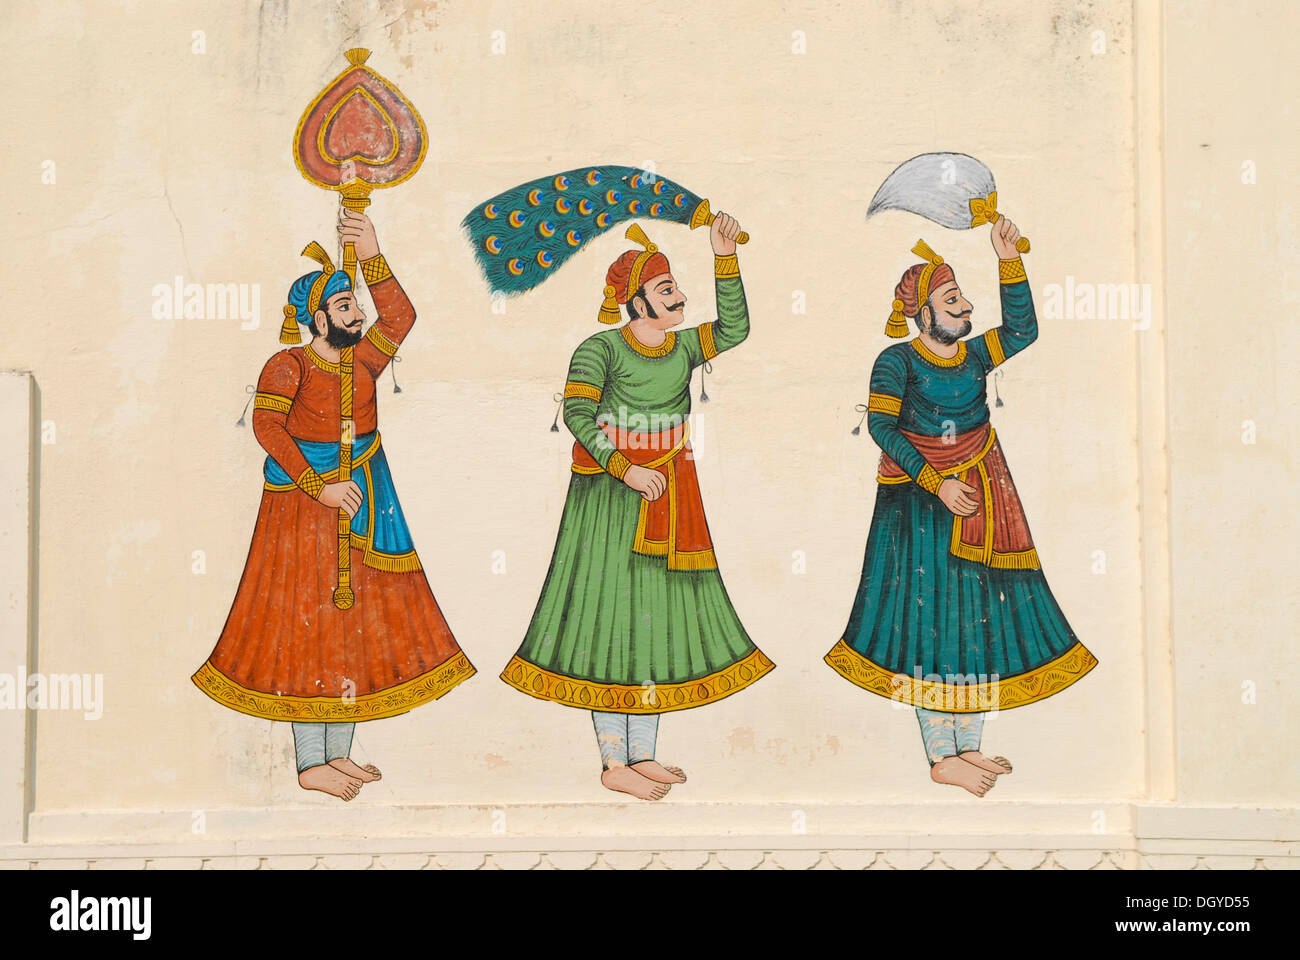 Mural, officials of the maharajas, Shiv Niwas, city palace of Udaipur, Rajasthan, North India, India, Asia Stock Photo